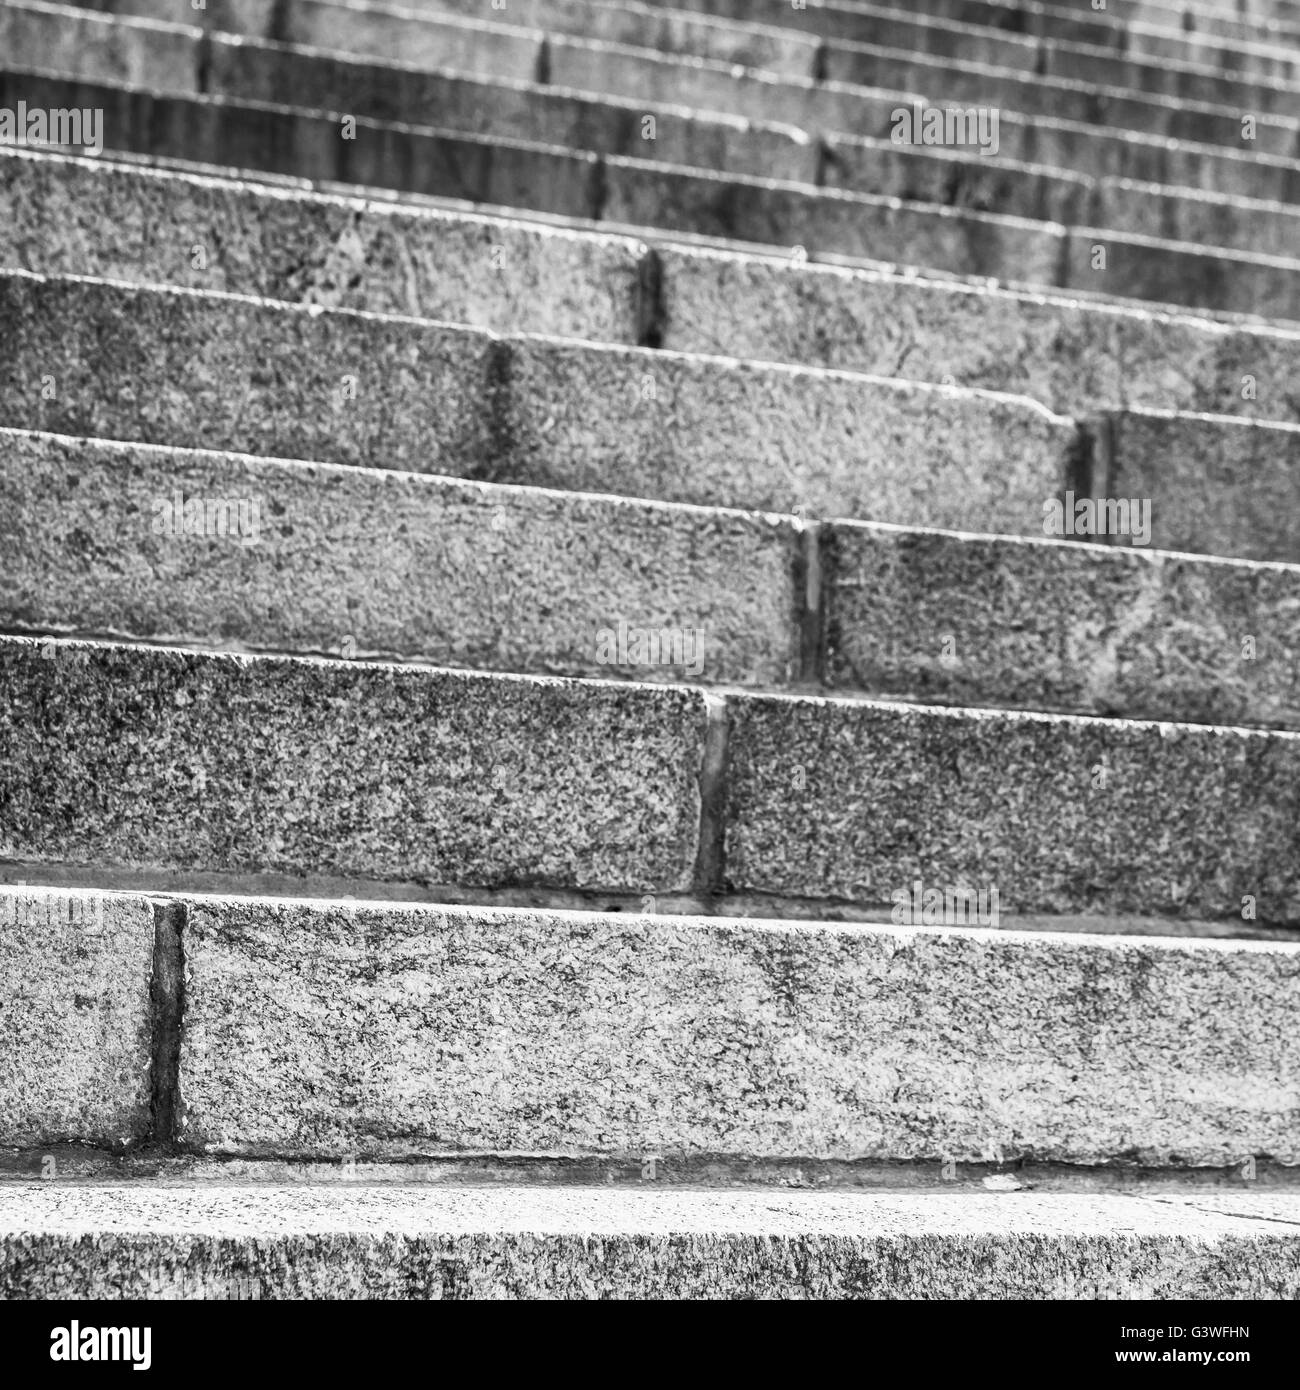 Abstract architecture fragment. Old stairway made of gray granite stone blocks, square closeup photo with selective focus Stock Photo